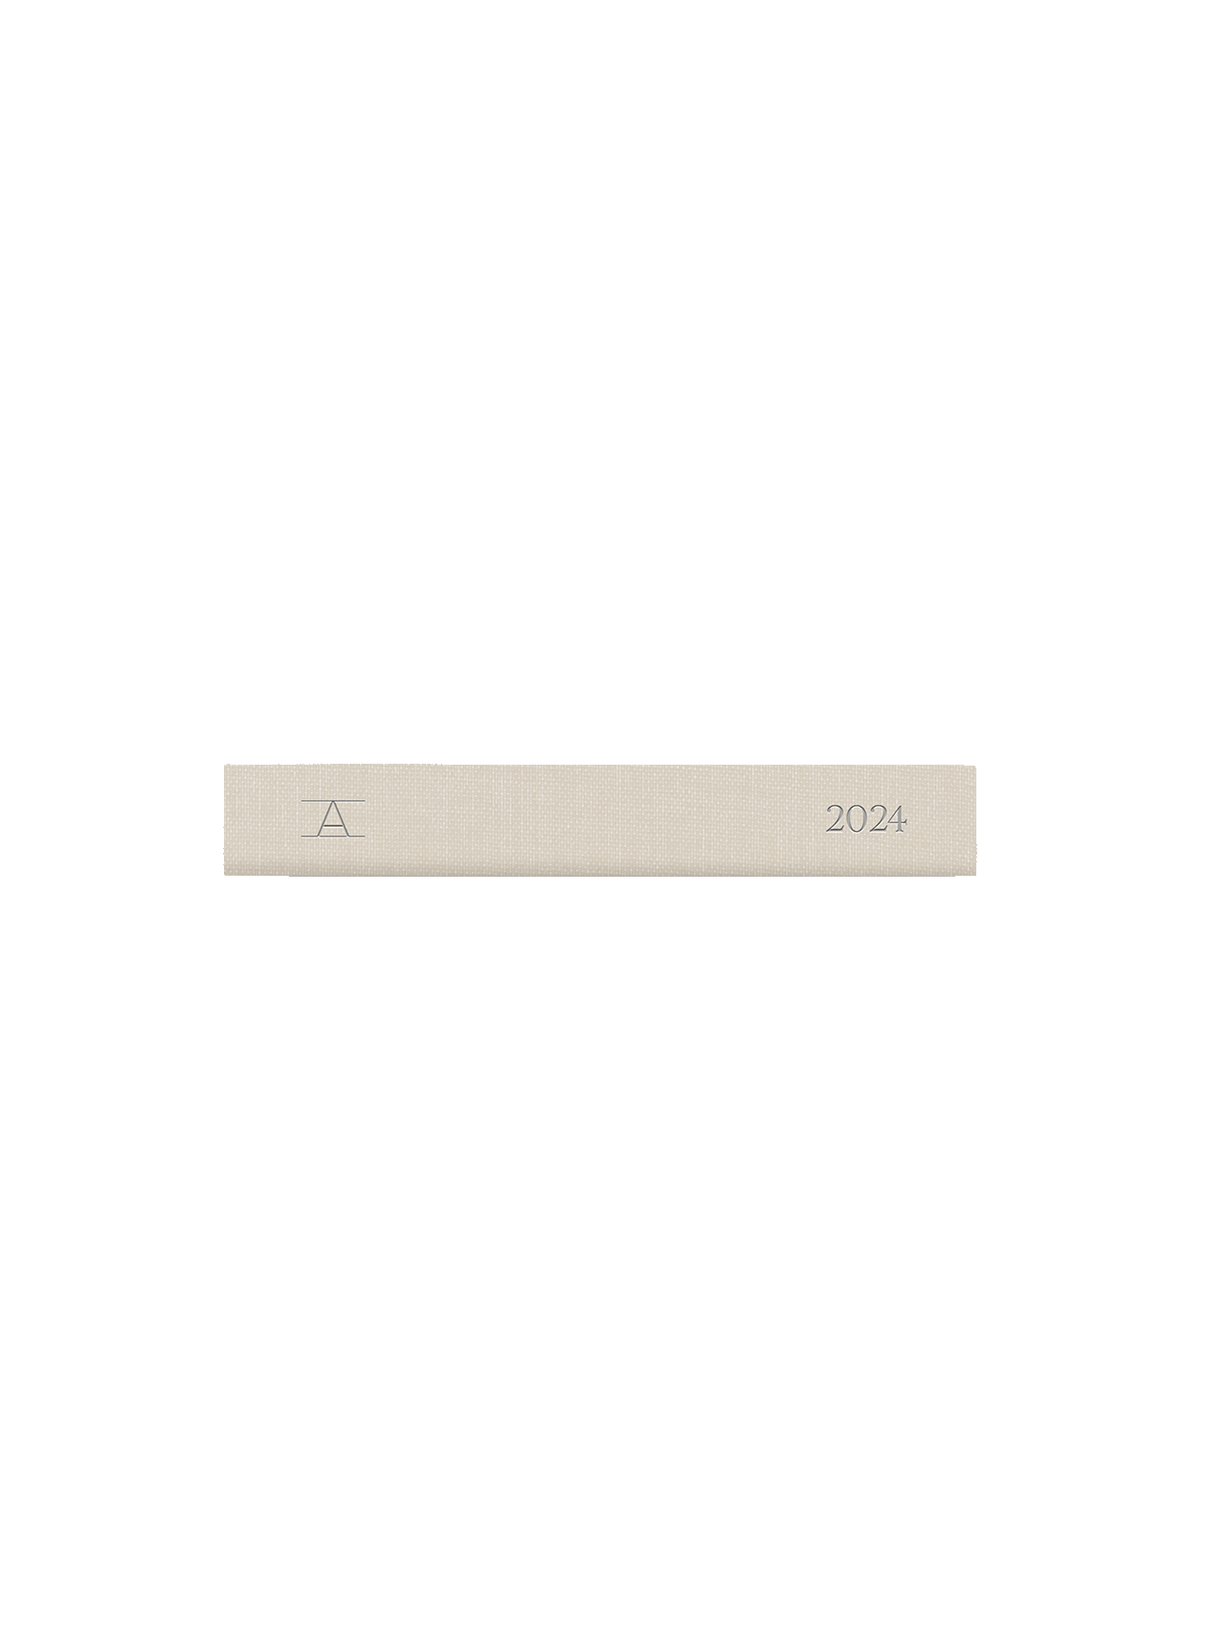 Special Edition Pocket Notepad image view of Appointed logo and year 2024 || Natural Linen